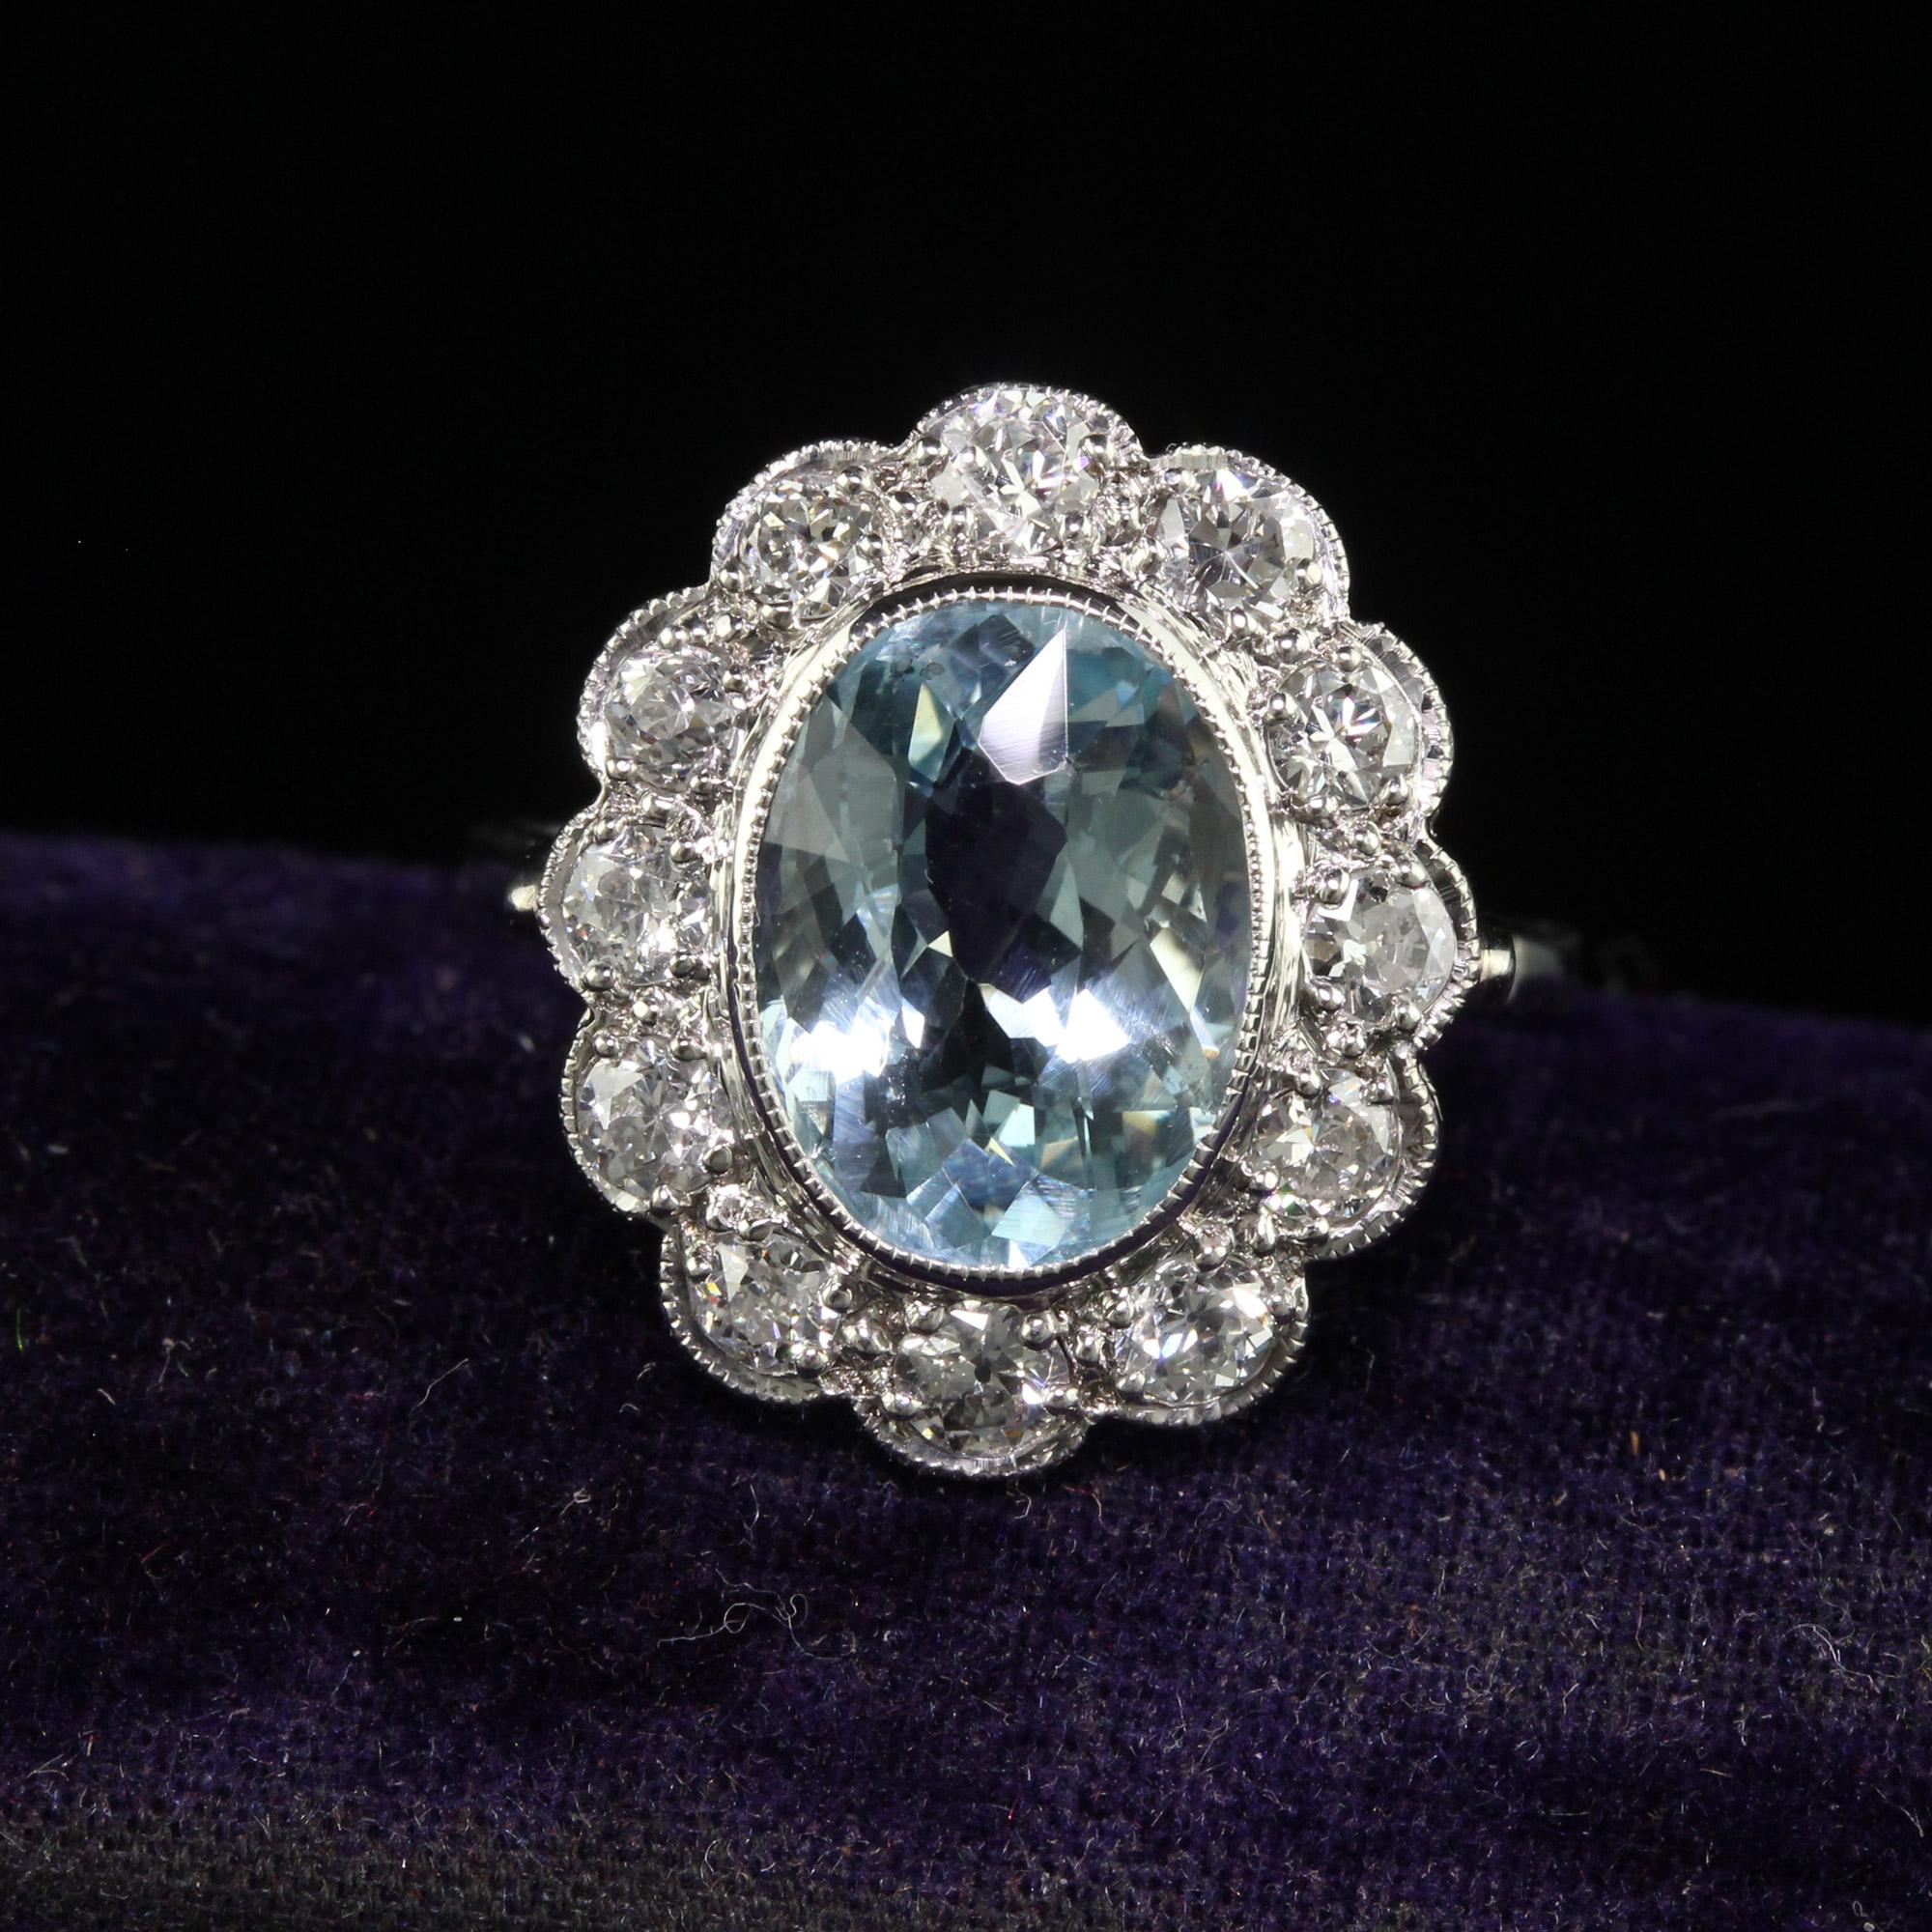 Beautiful Antique Art Deco Platinum Old Euro Diamond and Aquamarine Engagement Ring. This gorgeous art deco aquamarine ring is crafted in platinum. The center holds a beautiful blue aquamarine and is surrounded by old European cut diamonds. The ring